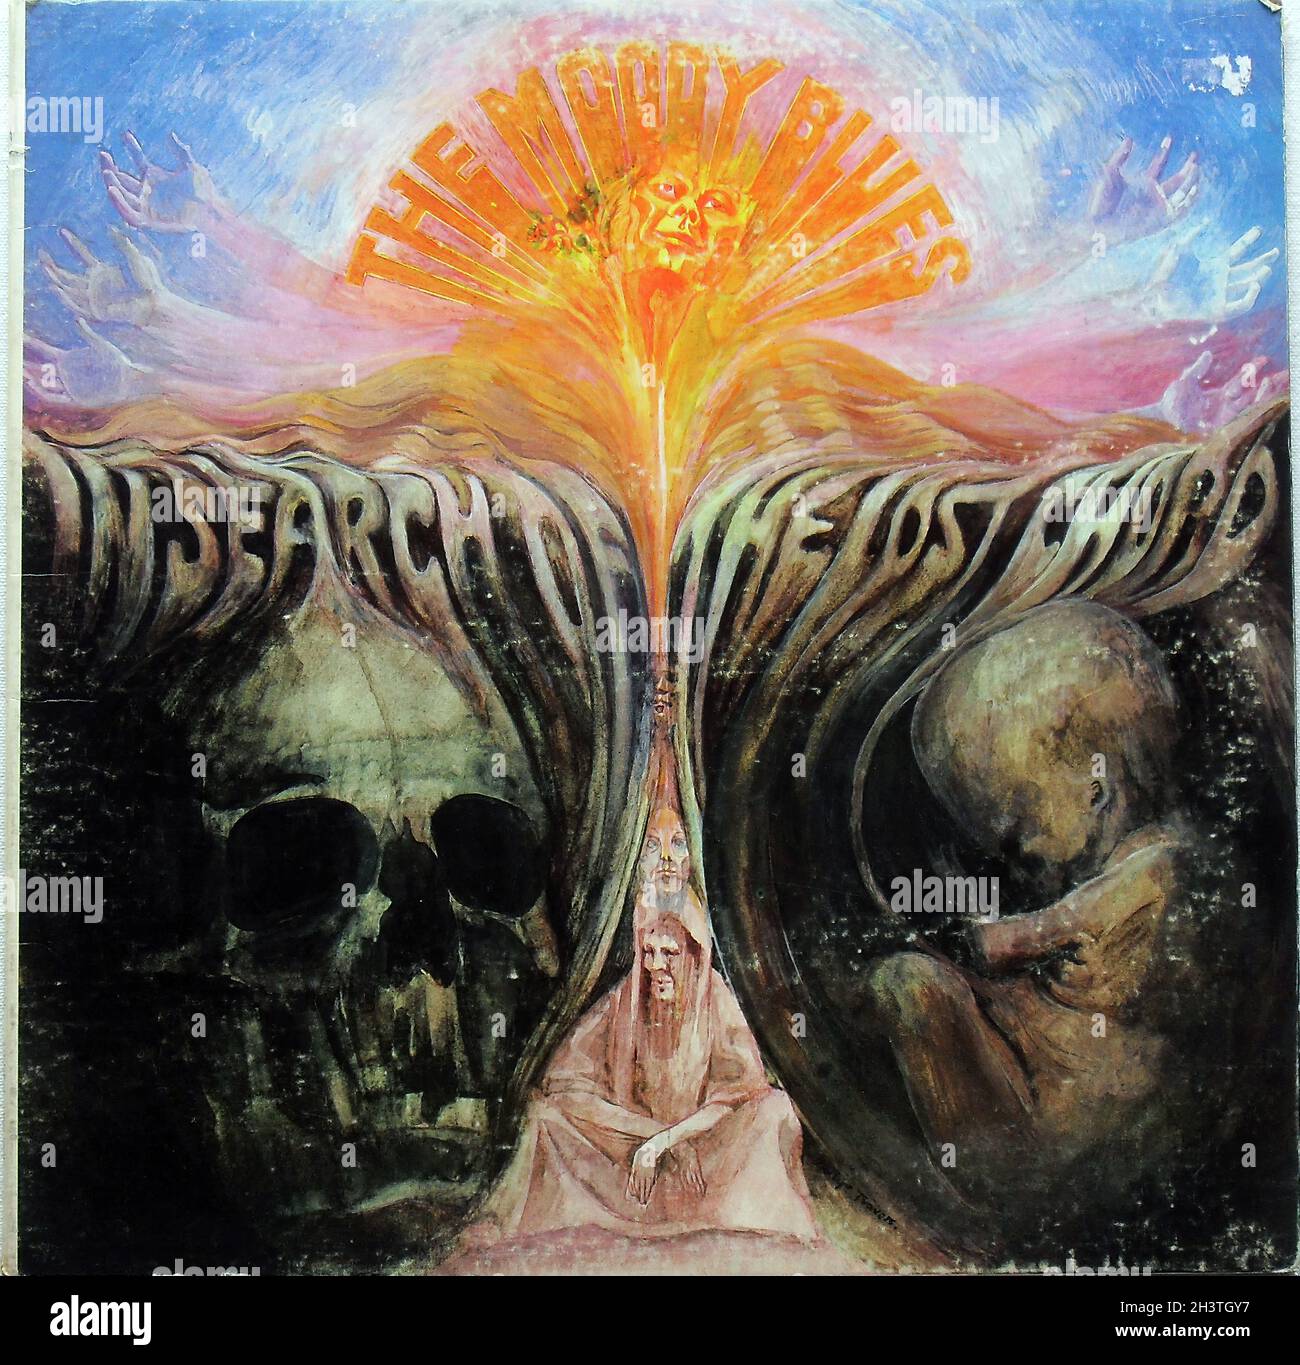 Moody Blues 1969 LP in Search of the Lost Chord Record Album 1960 Original Vintage Vinyl Sleeve Foto Stock